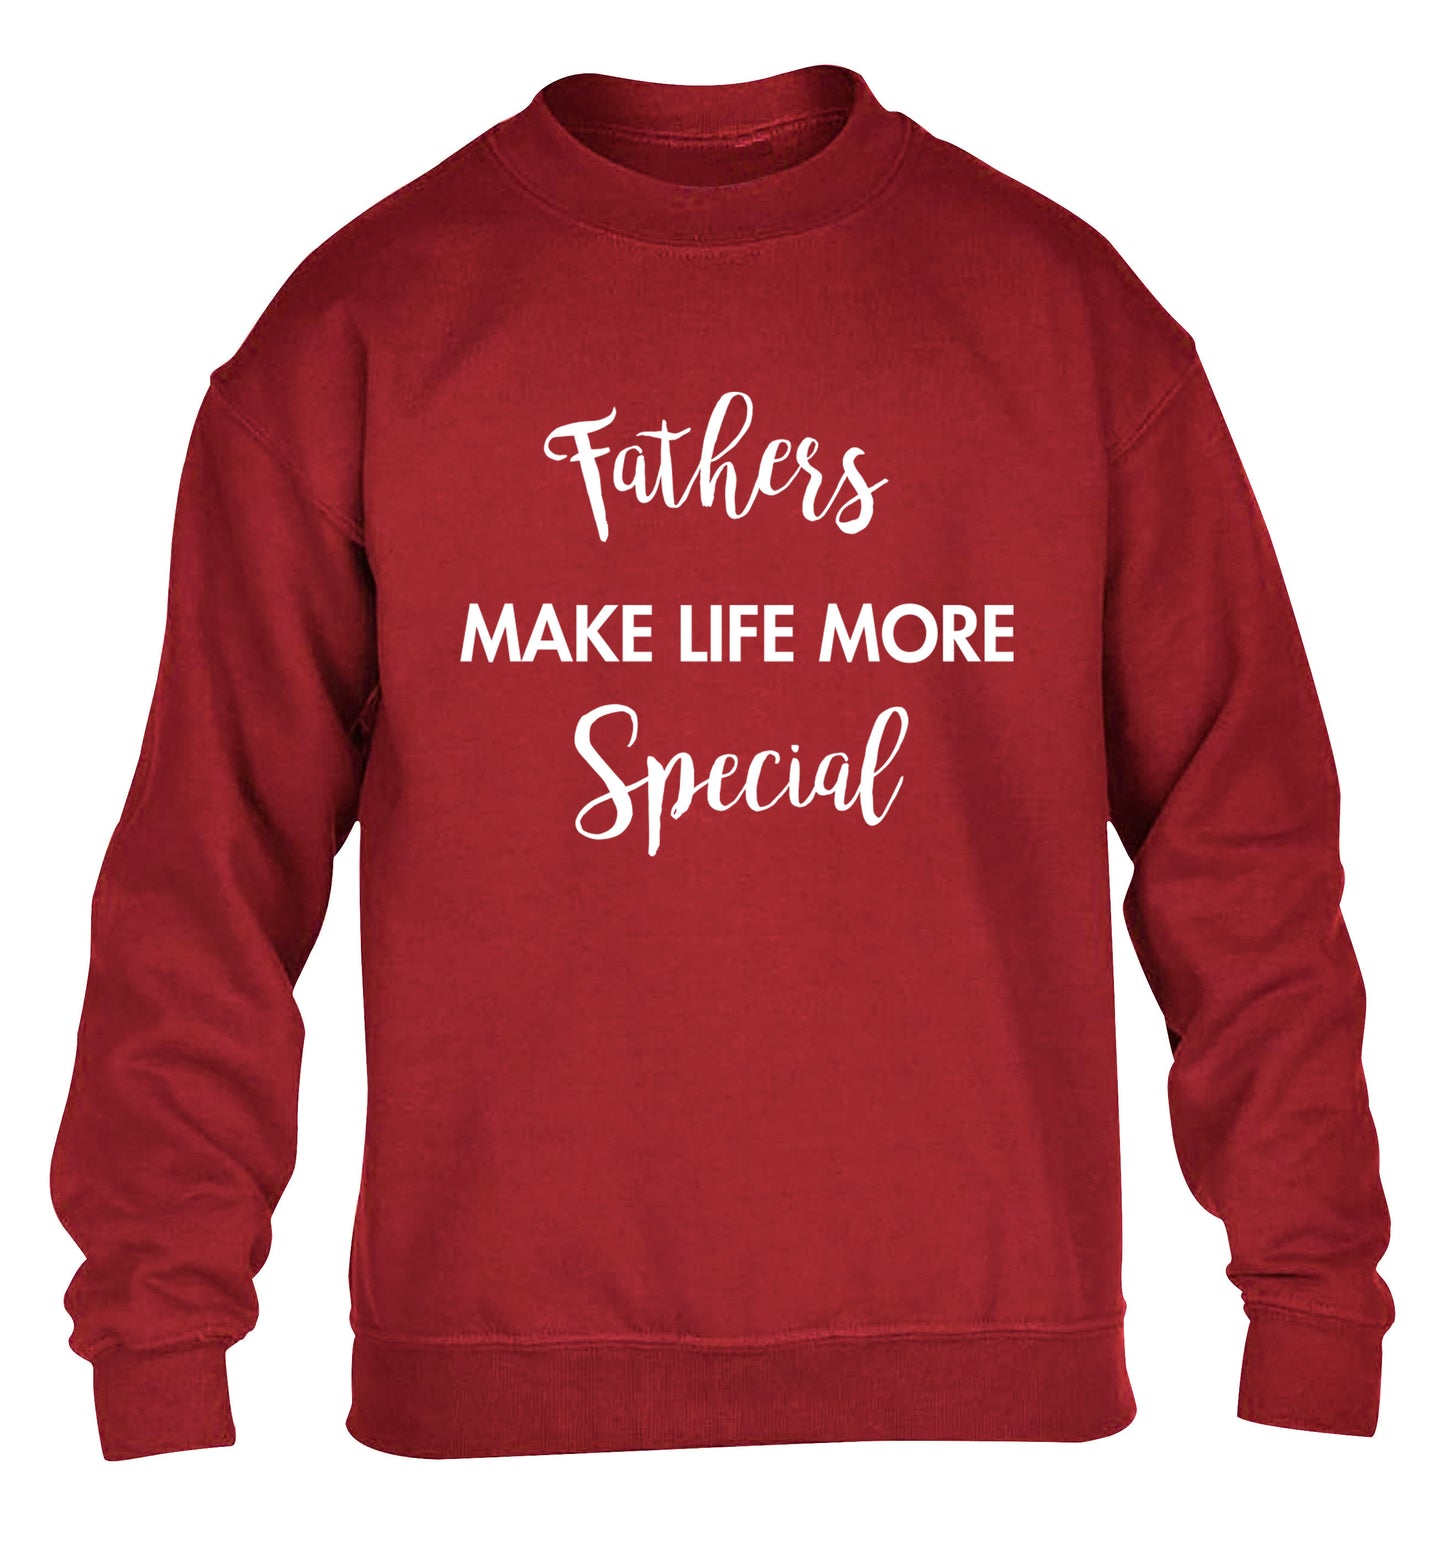 Fathers make life more special children's grey sweater 12-14 Years